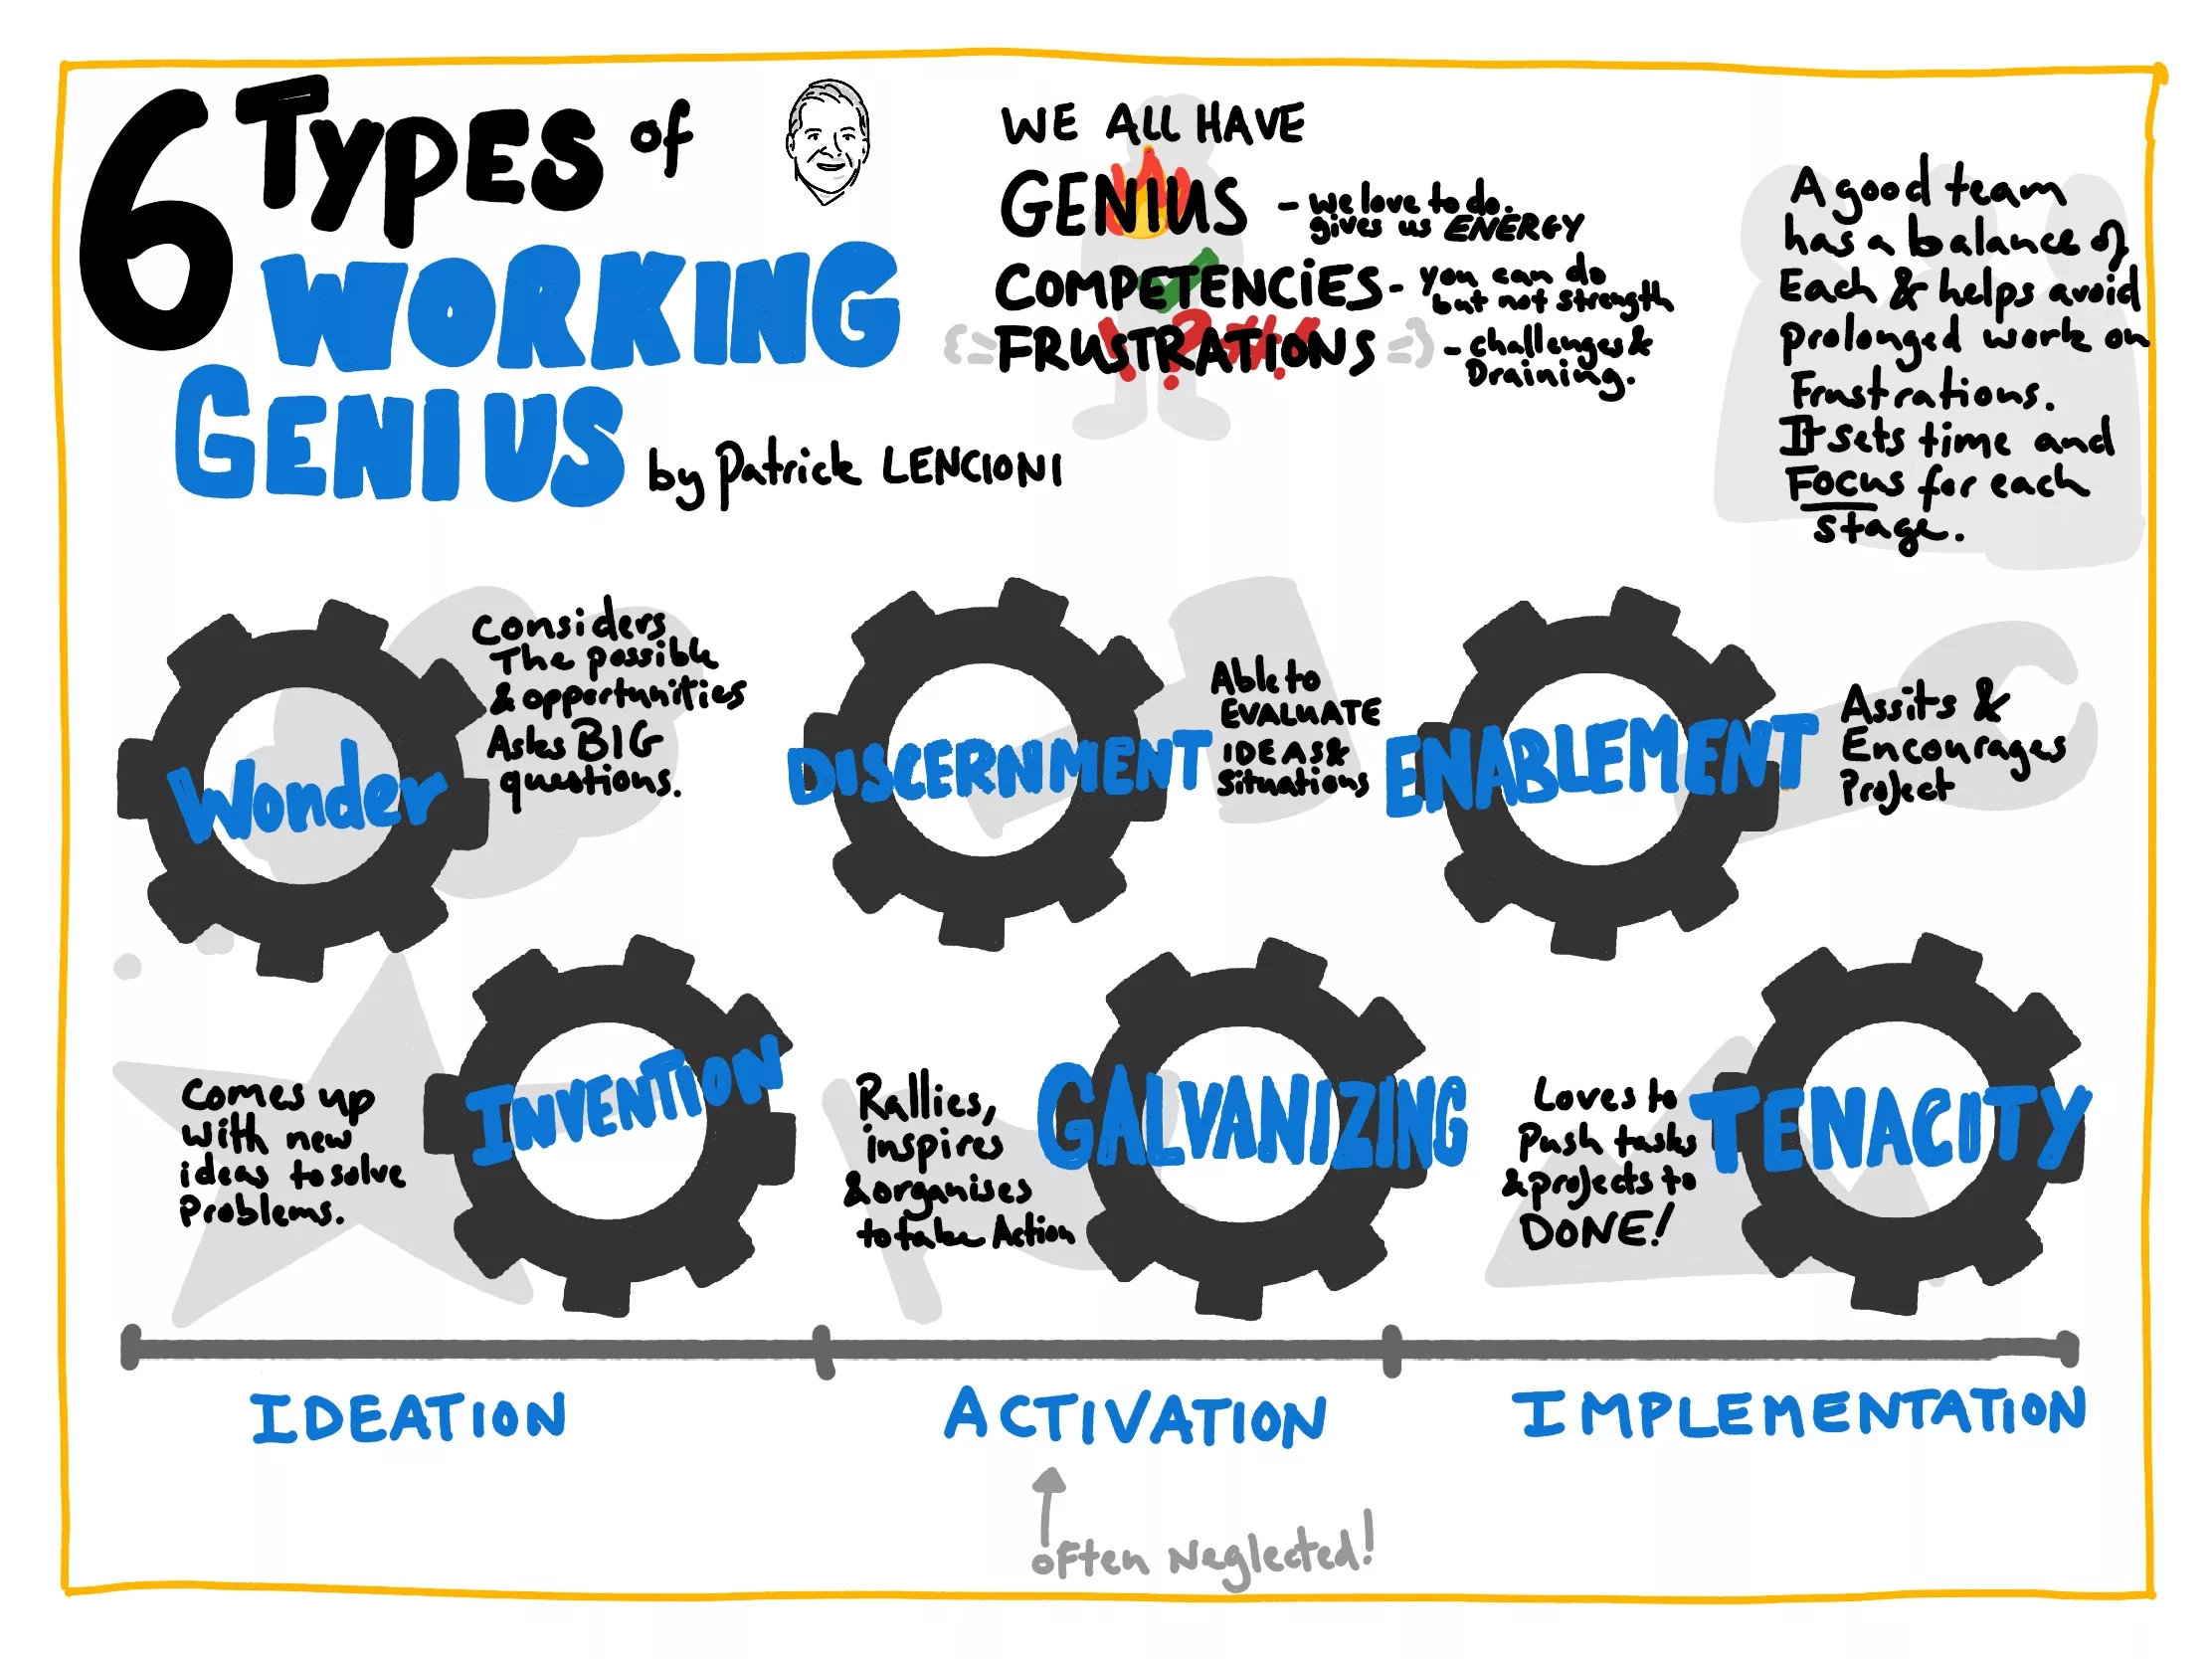 The 6 Types of Working Genius Sketchnote Summary